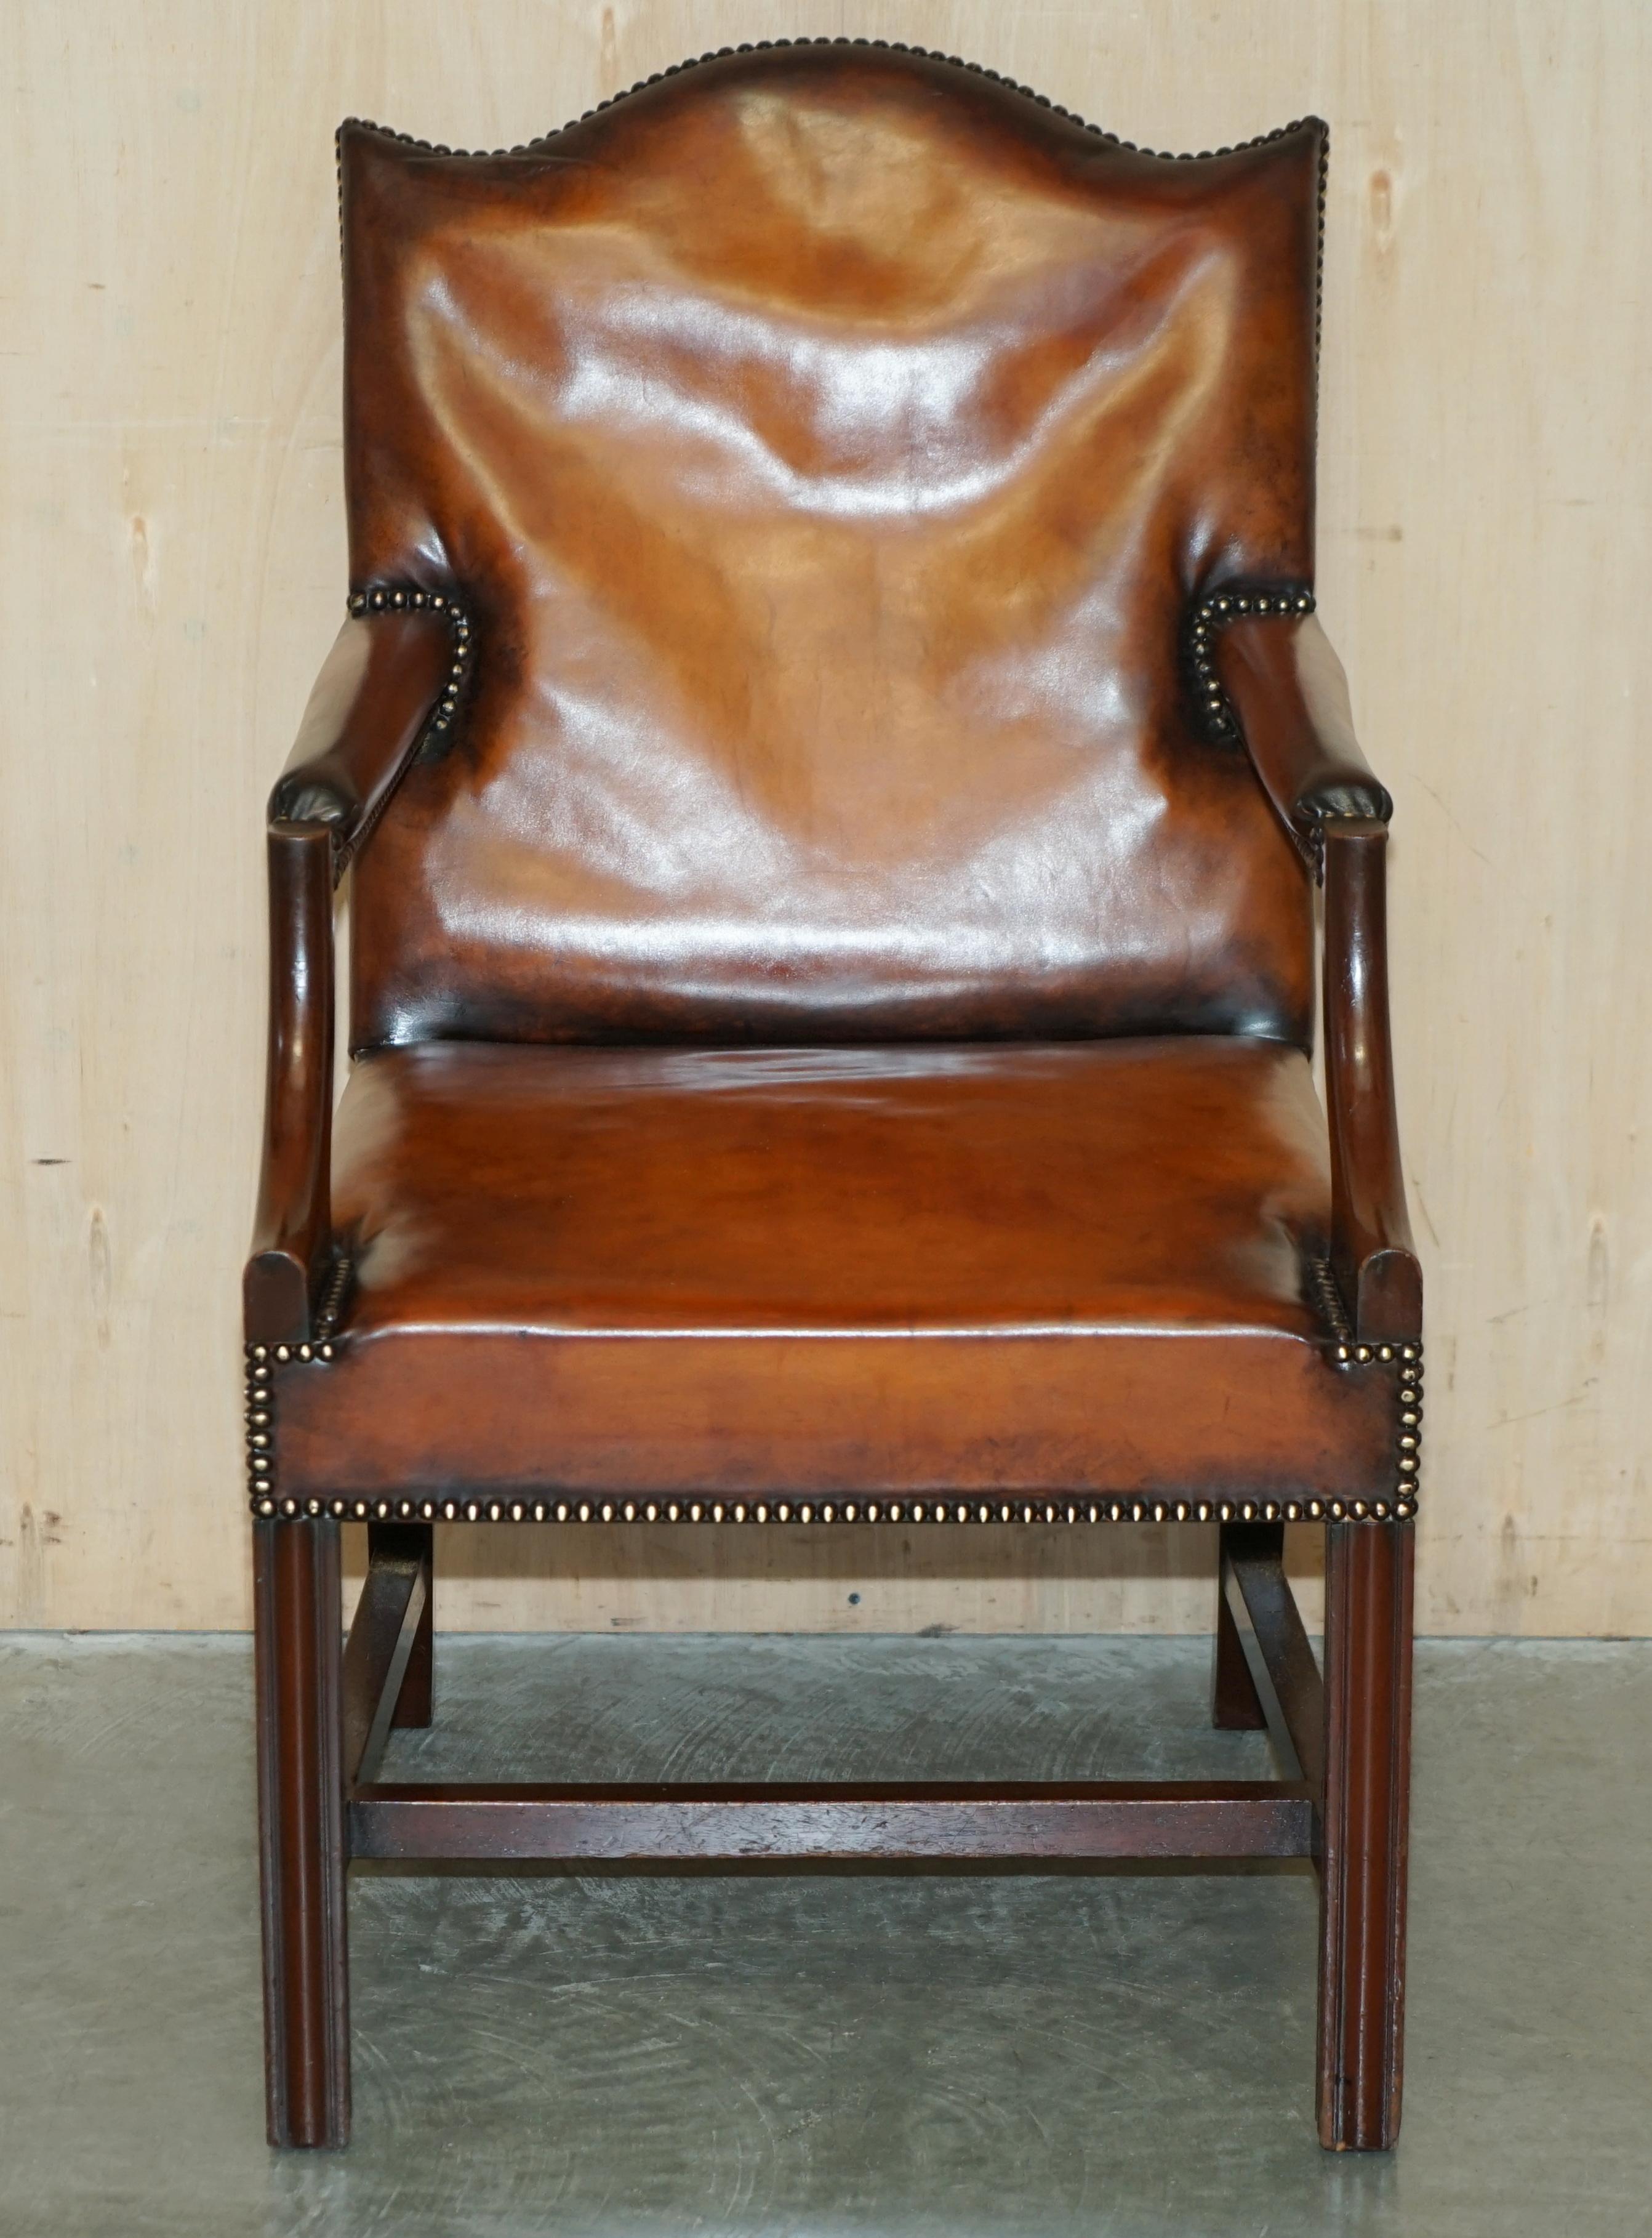 Royal House Antiques

Royal House Antiques is delighted to offer for sale this lovely hand made in England circa 1900 fully restored Whisky brown leather Gainsborough carver desk armchair 

Please note the delivery fee listed is just a guide, it